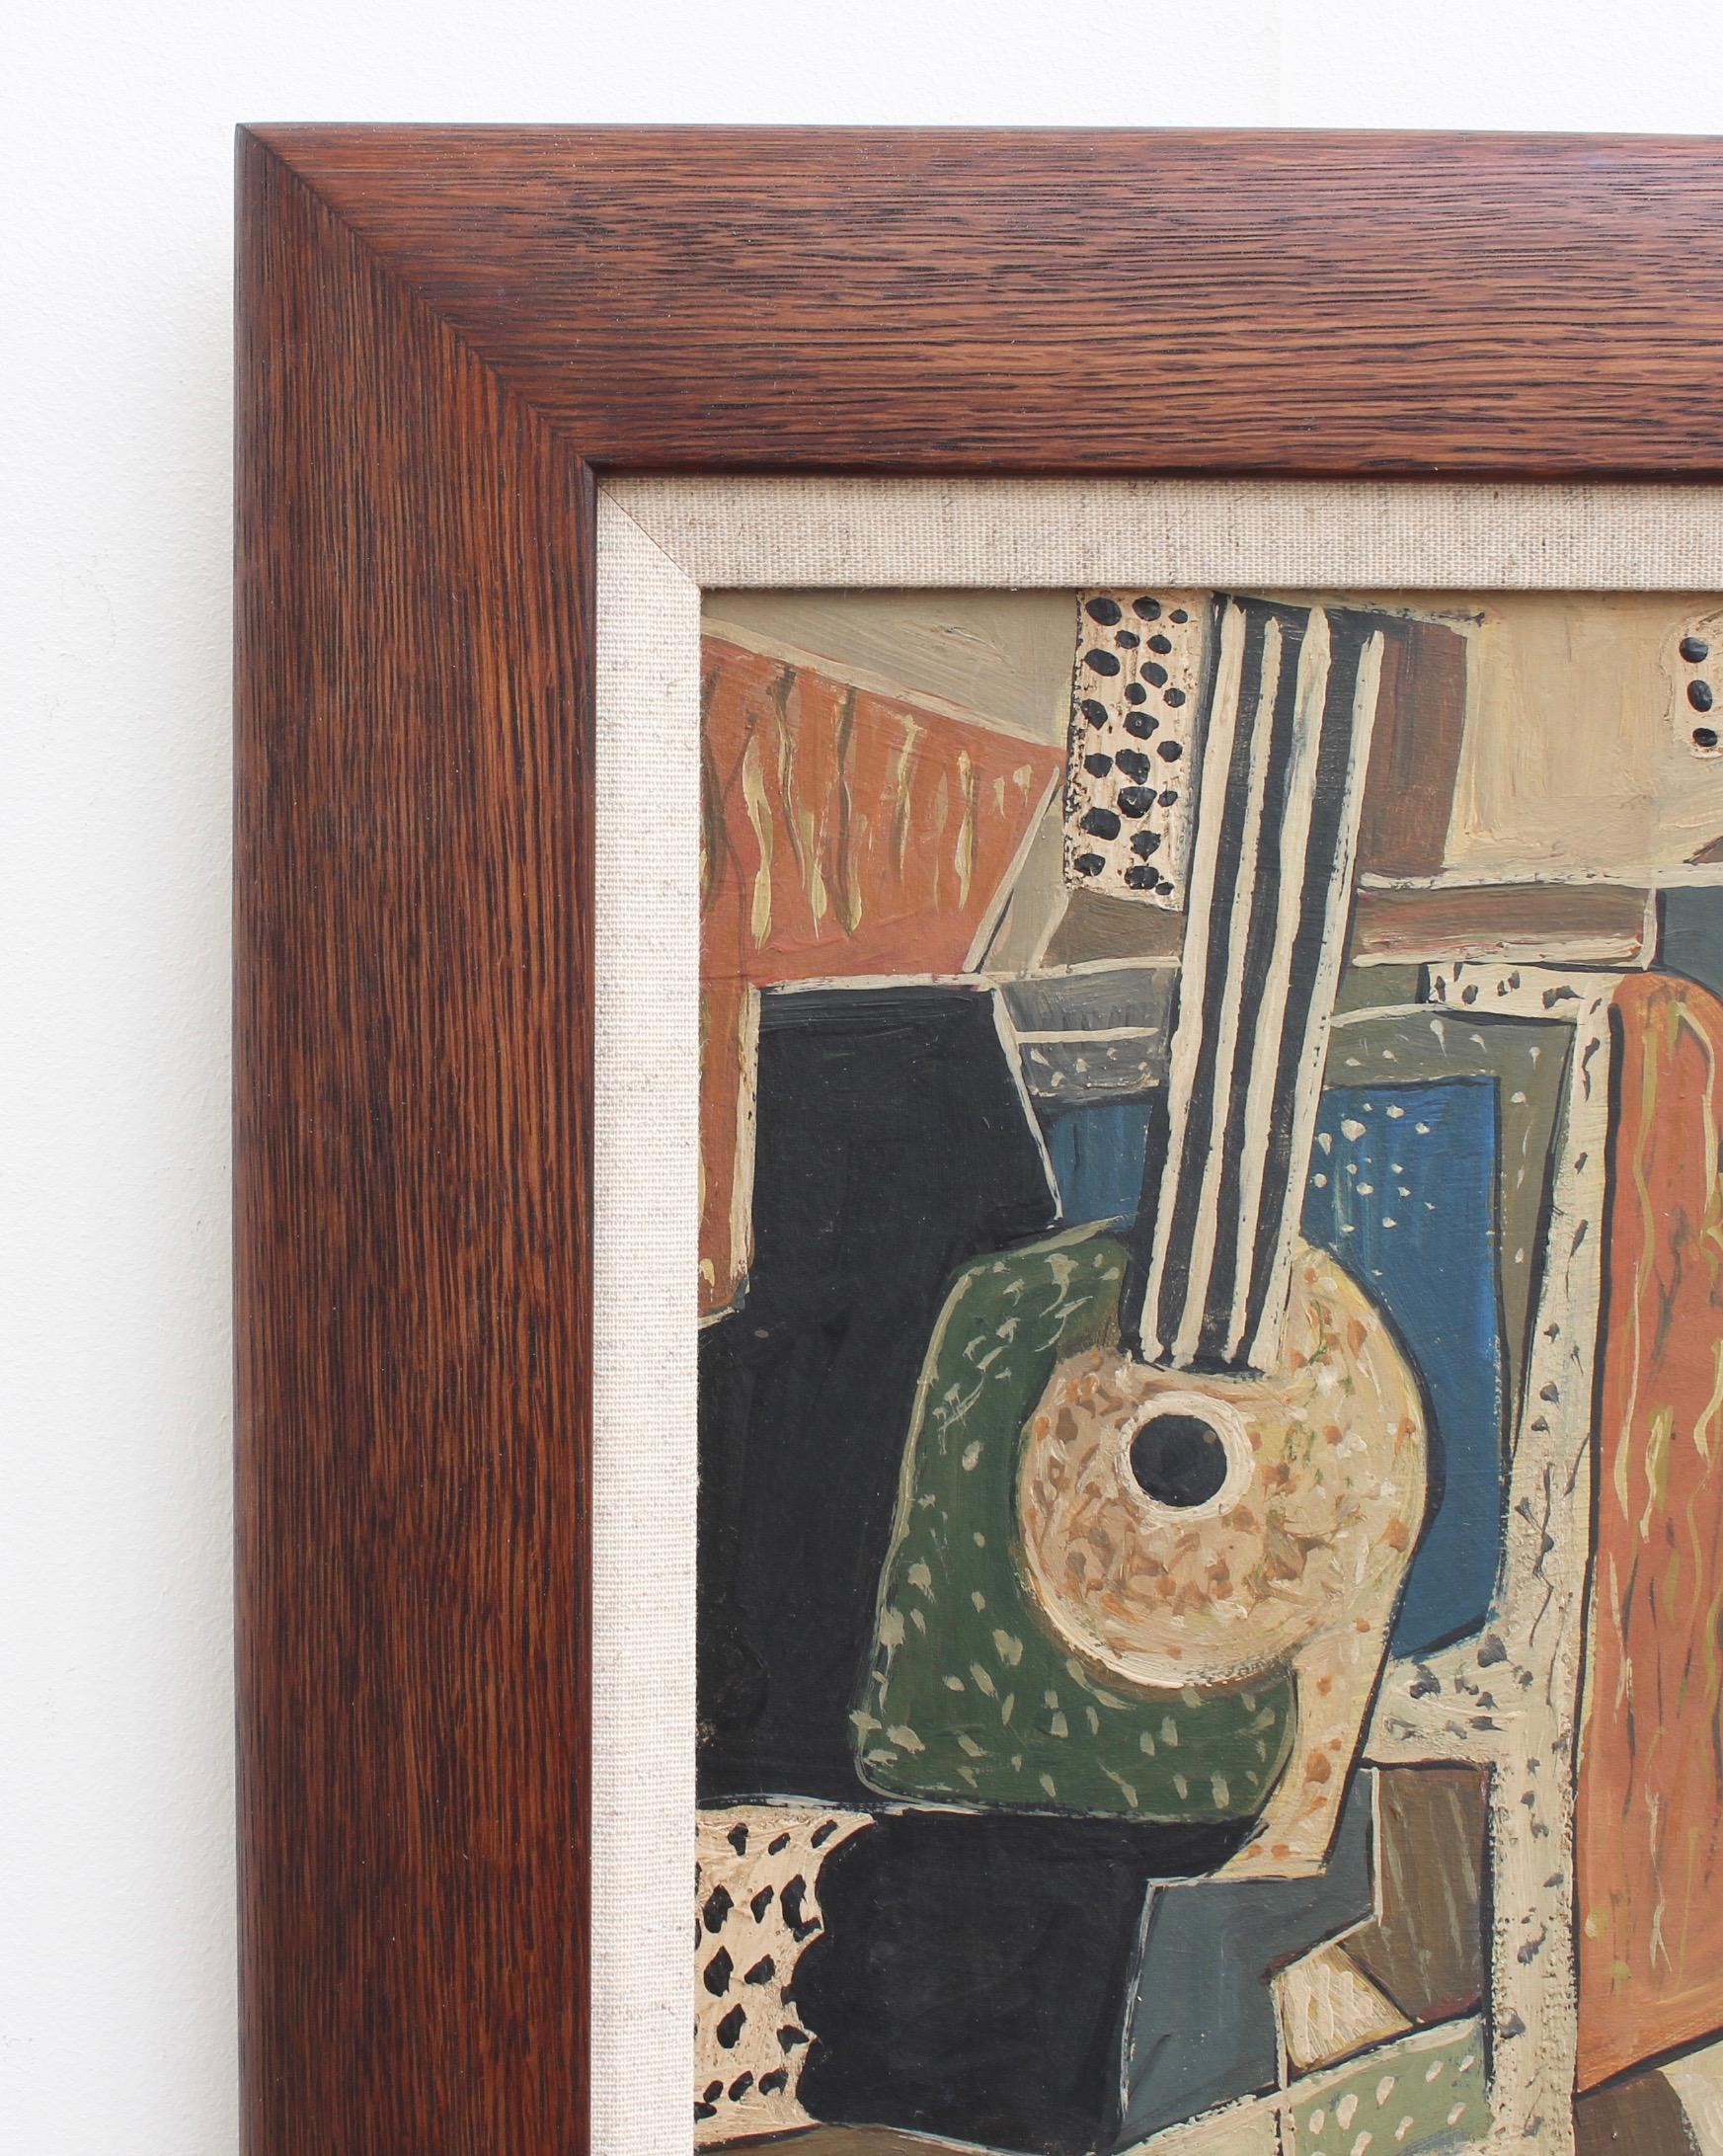 Still Life with Guitar - Cubist Painting by Unknown